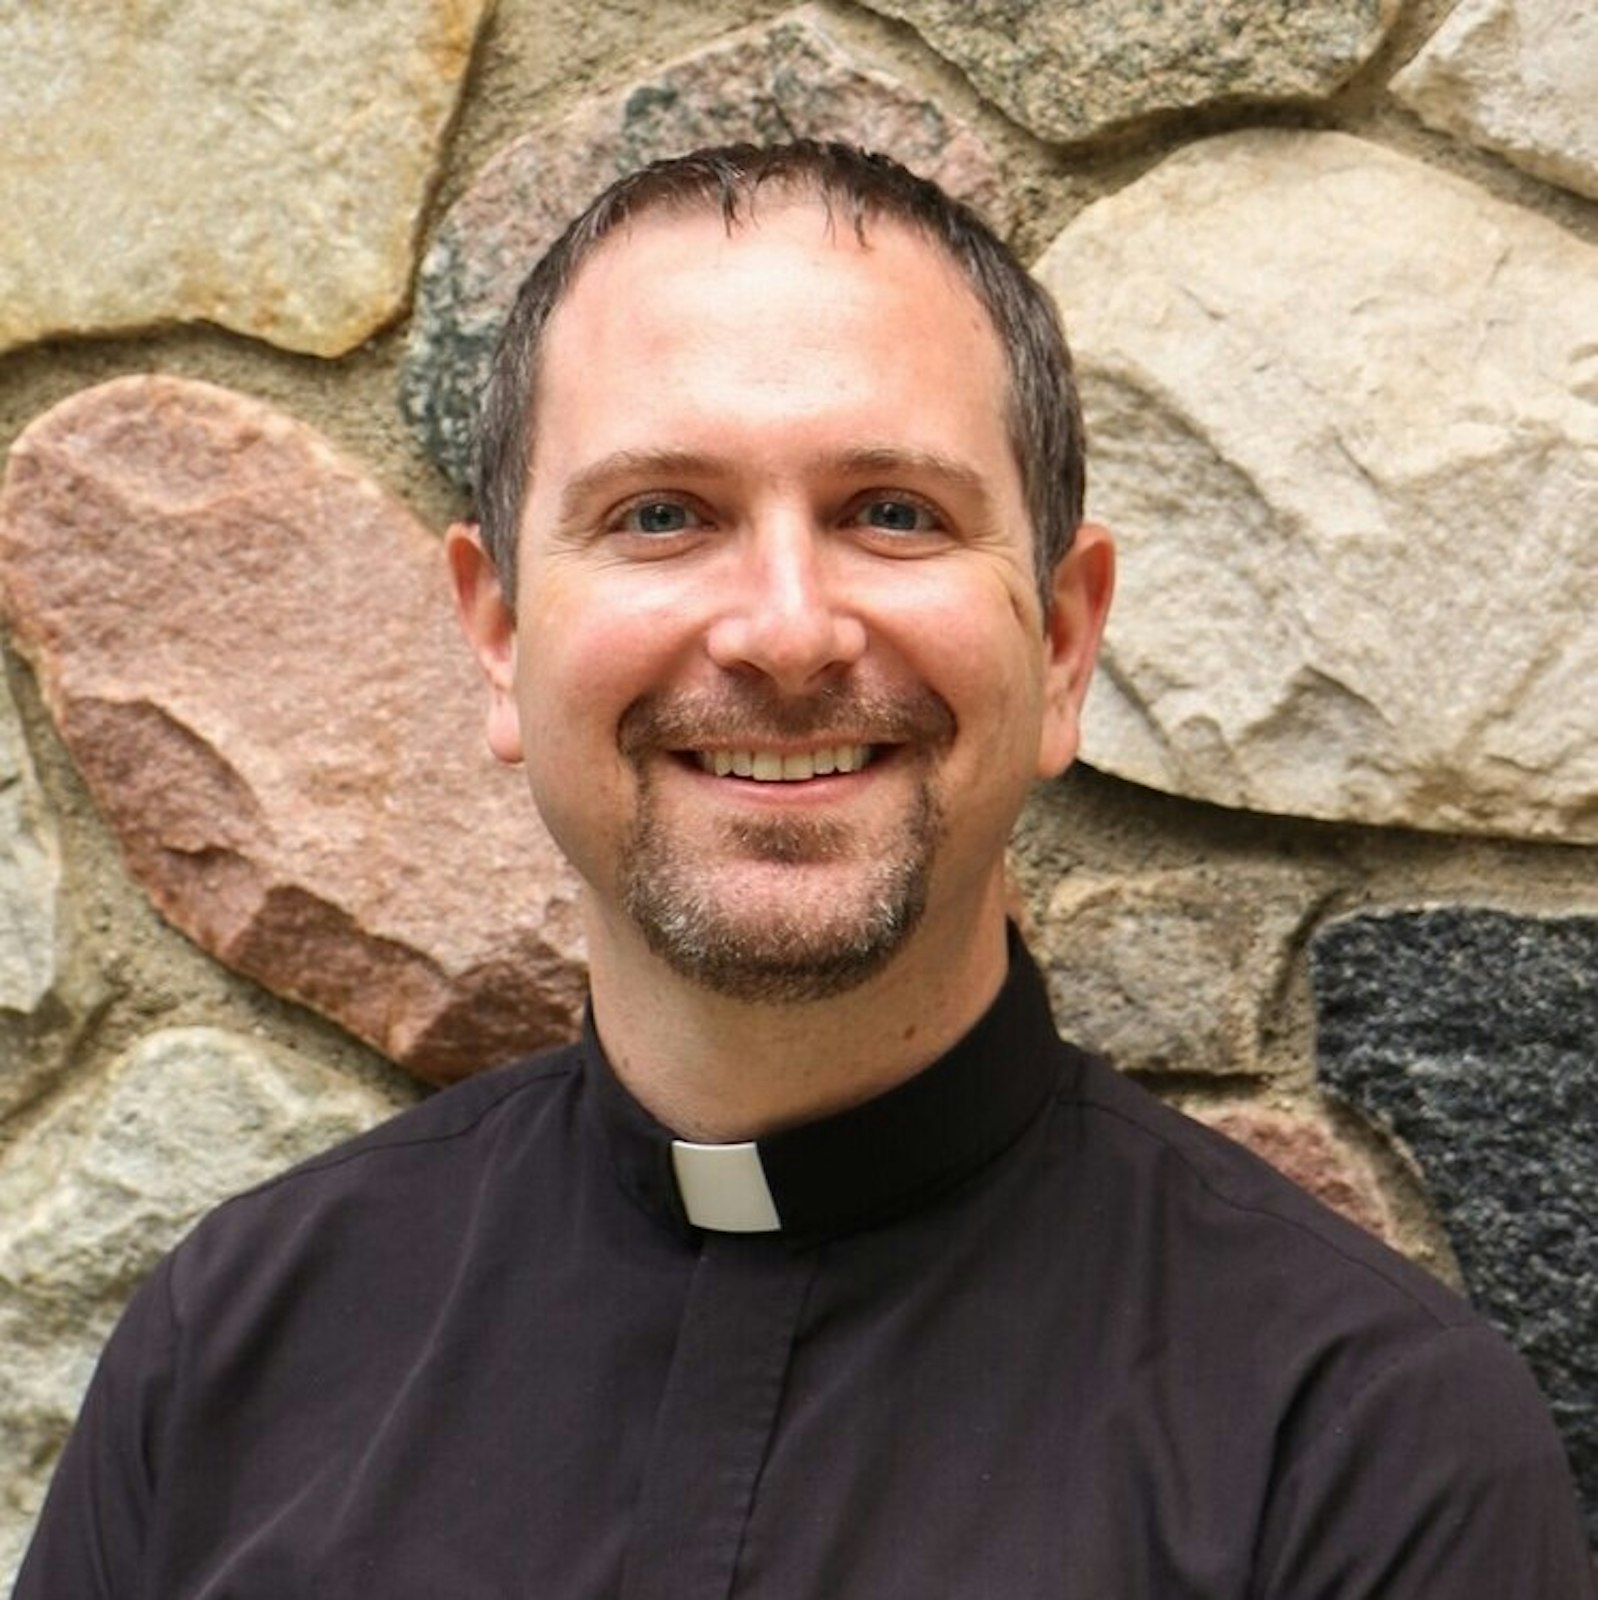 Fr. Mathias Thelen, pastor of St. Patrick Parish in Brighton and one of 50 handpicked preachers as part of the U.S. bishops' National Eucharistic Revival, will lead a night of devotion and Eucharistic adoration Friday, Nov. 18, at St. Scholastica Parish in Detroit. (Courtesy photo)